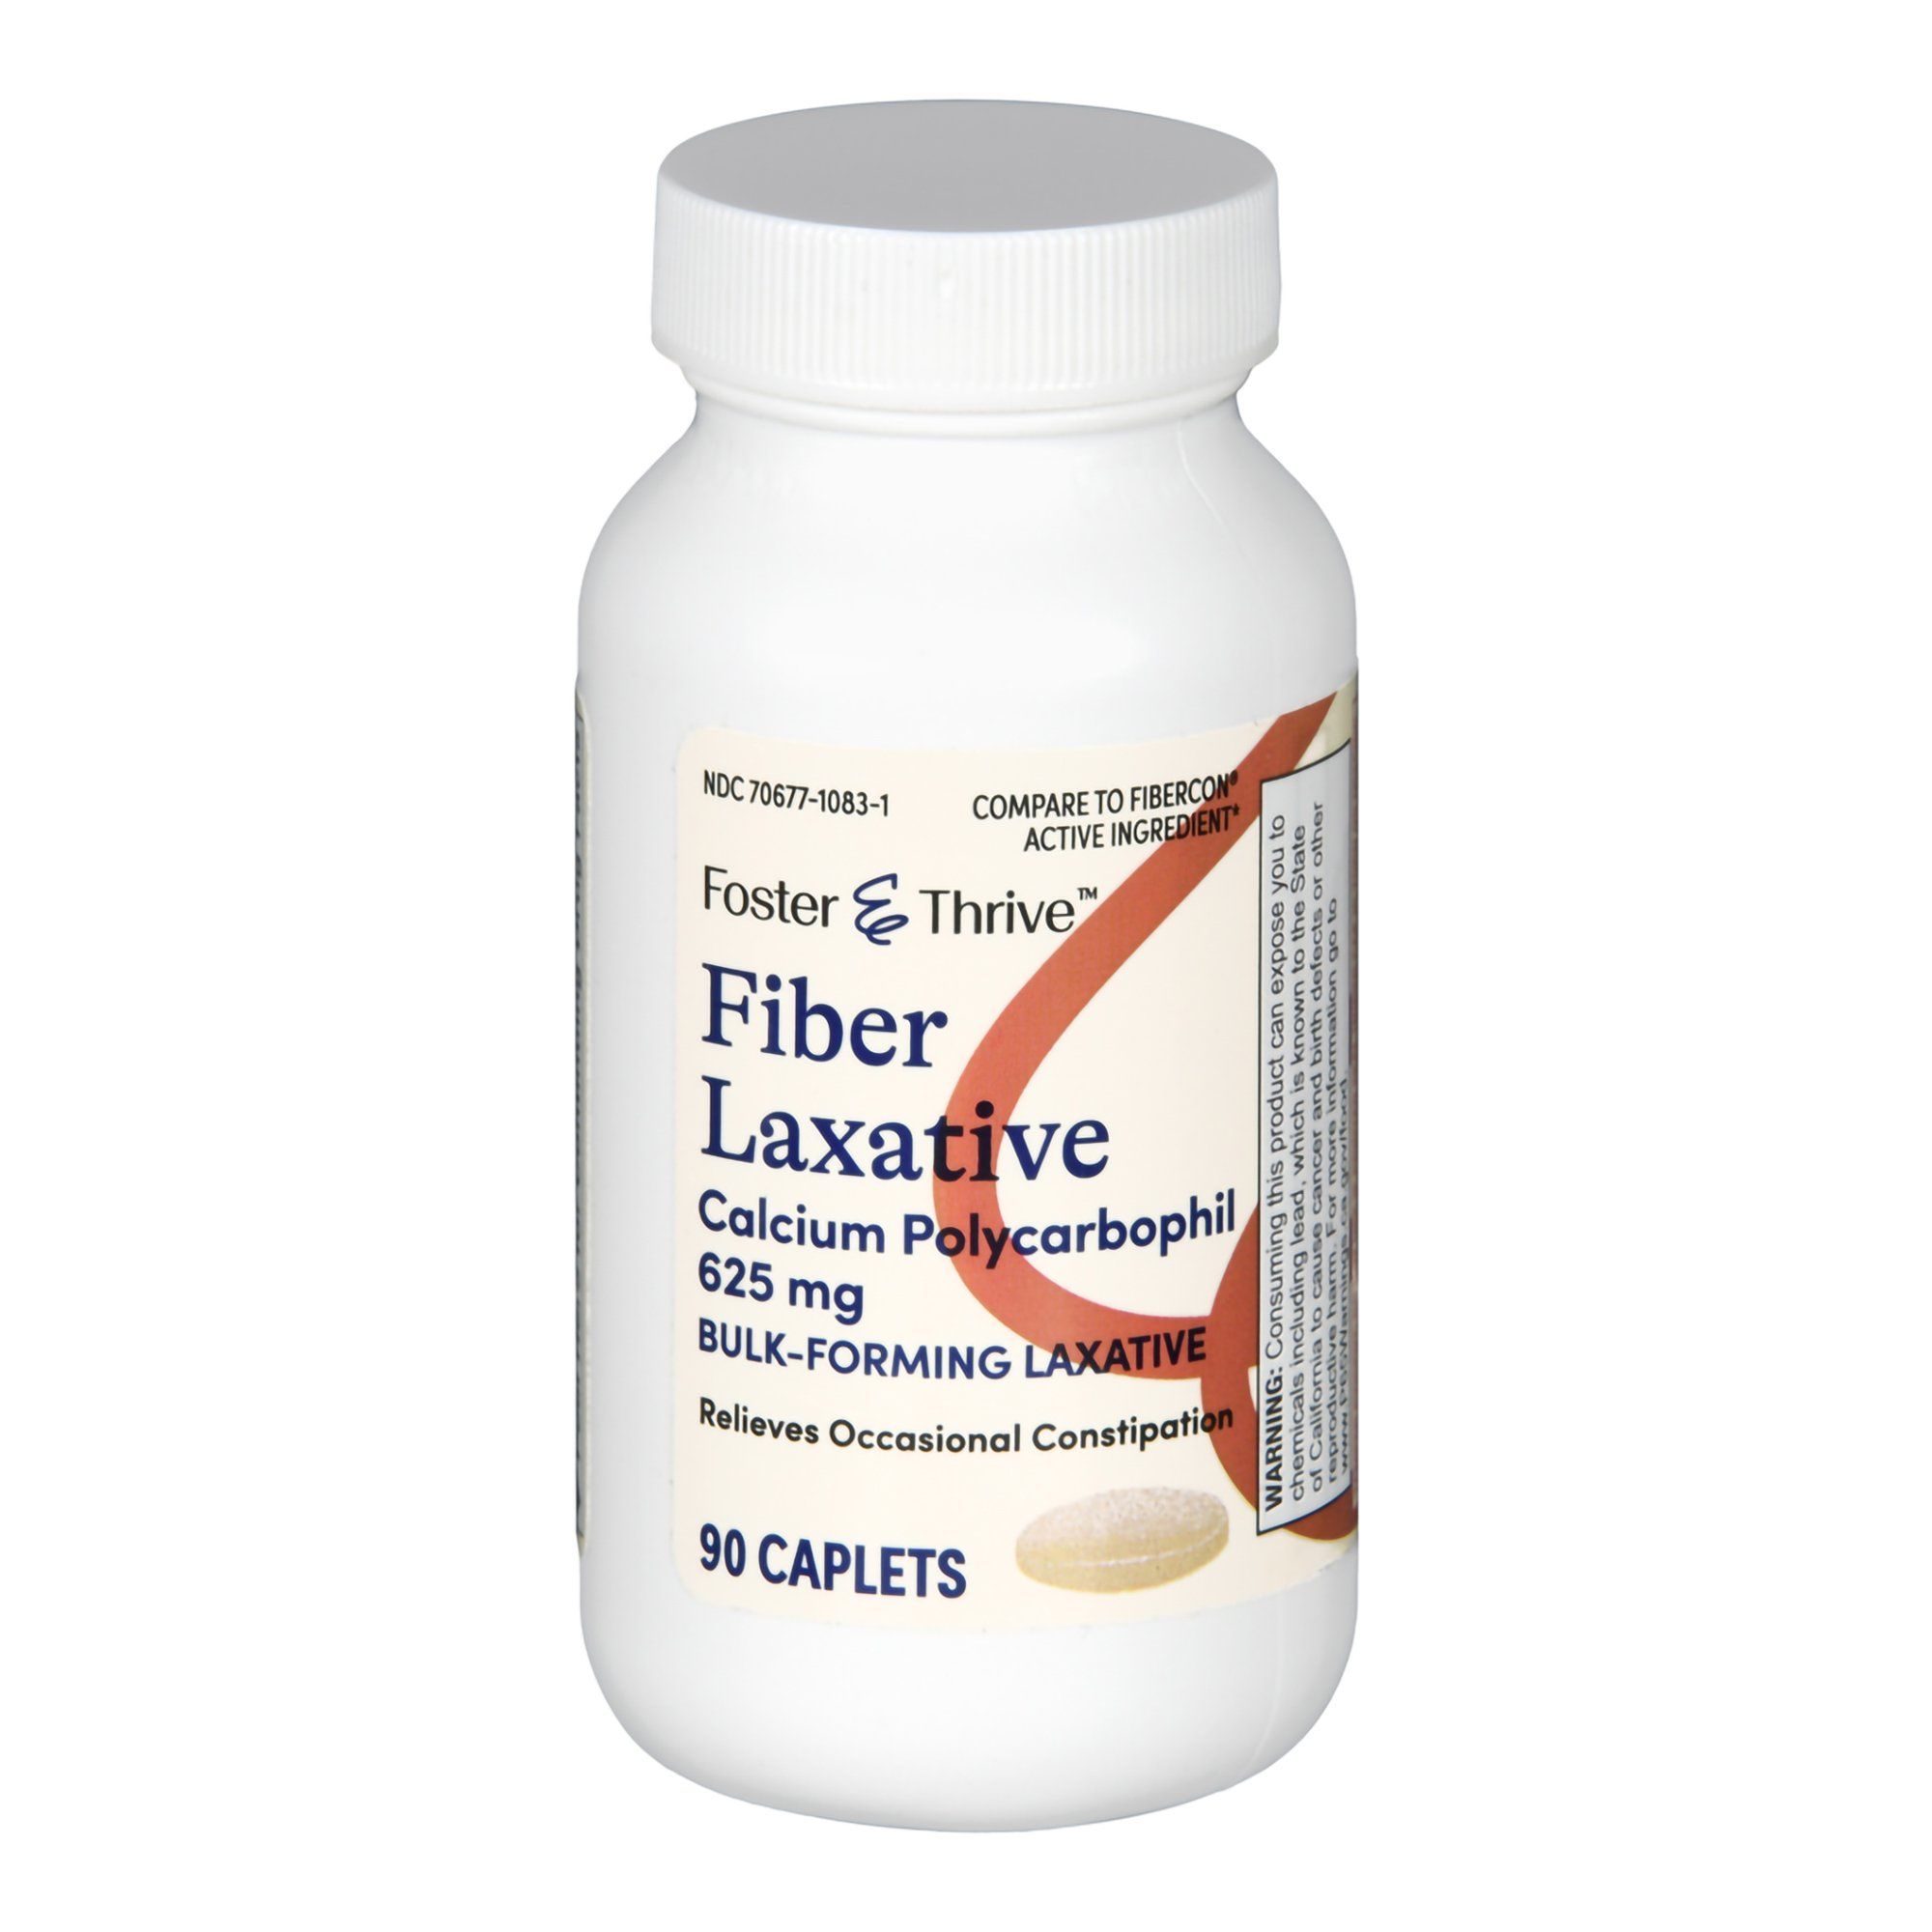 Foster & Thrive Fiber Laxative Calcium Polycarbophil Caplets, 625 mg  - 90 ct